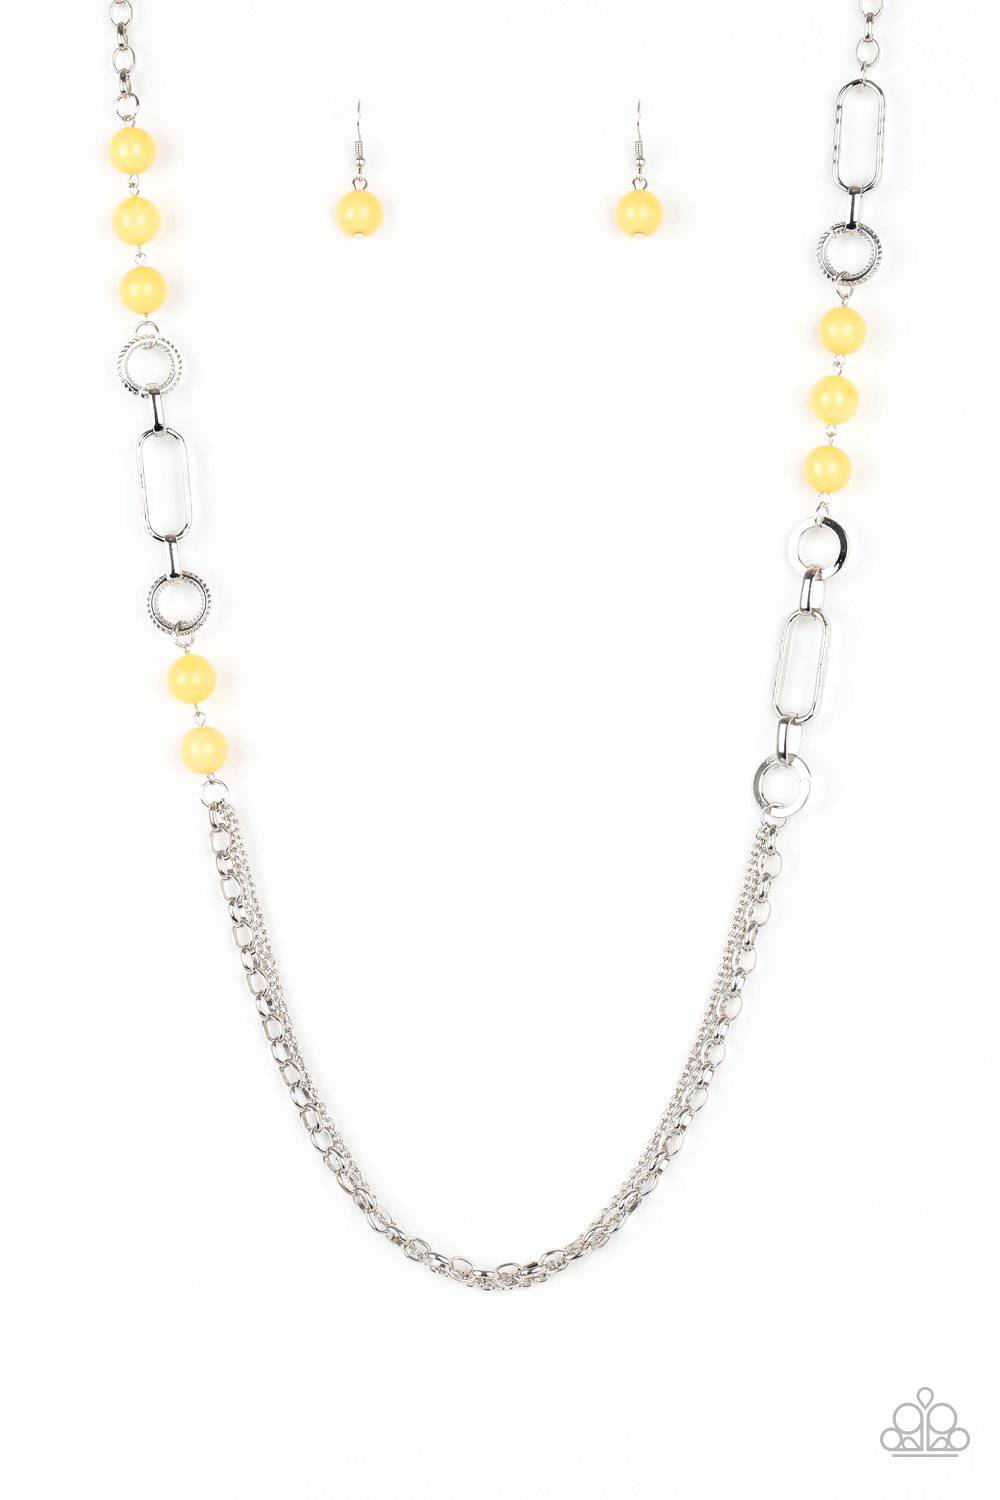 CACHE Me Out - Yellow - GlaMarous Titi Jewels